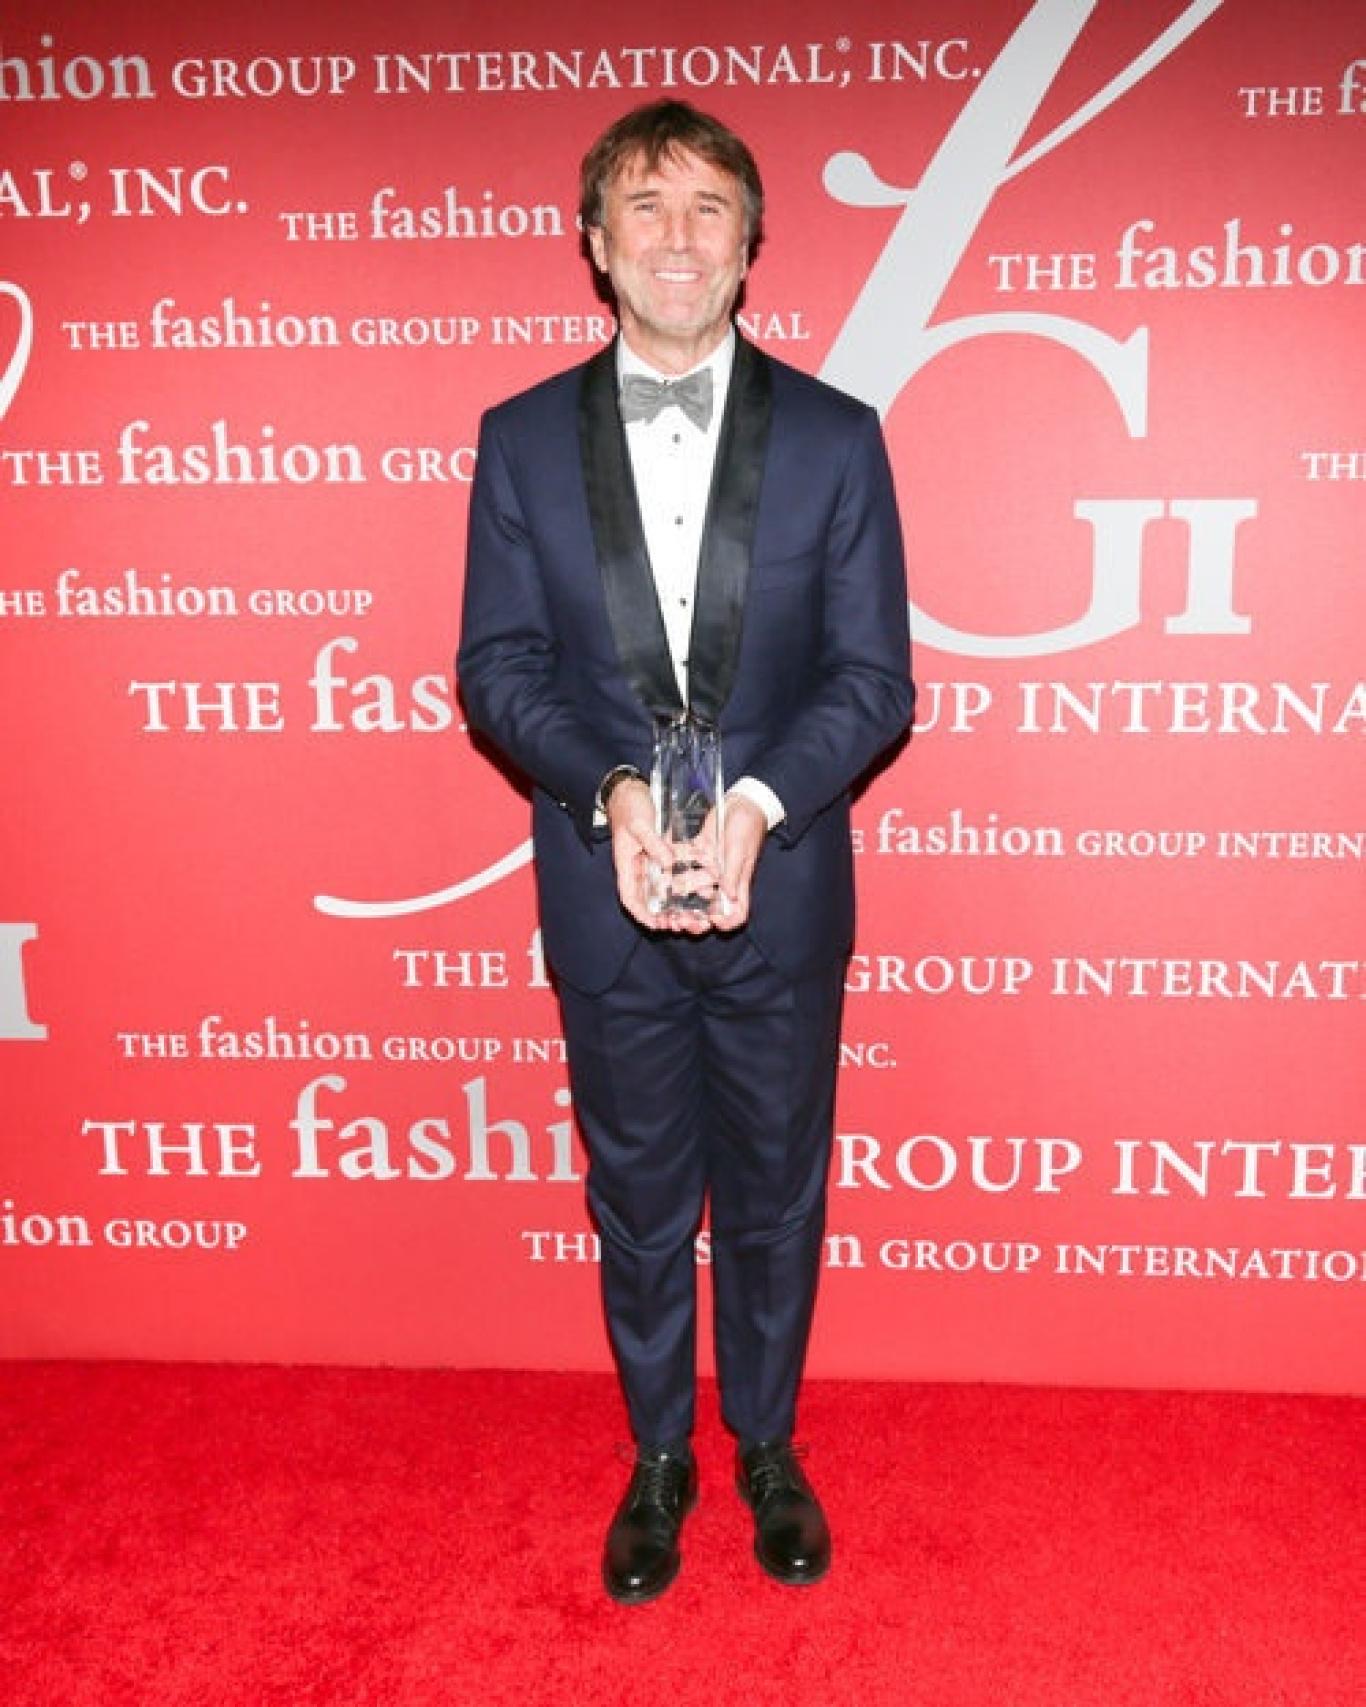 The Fashion Star Honoree Award 2014 goes to Brunello Cucinelli